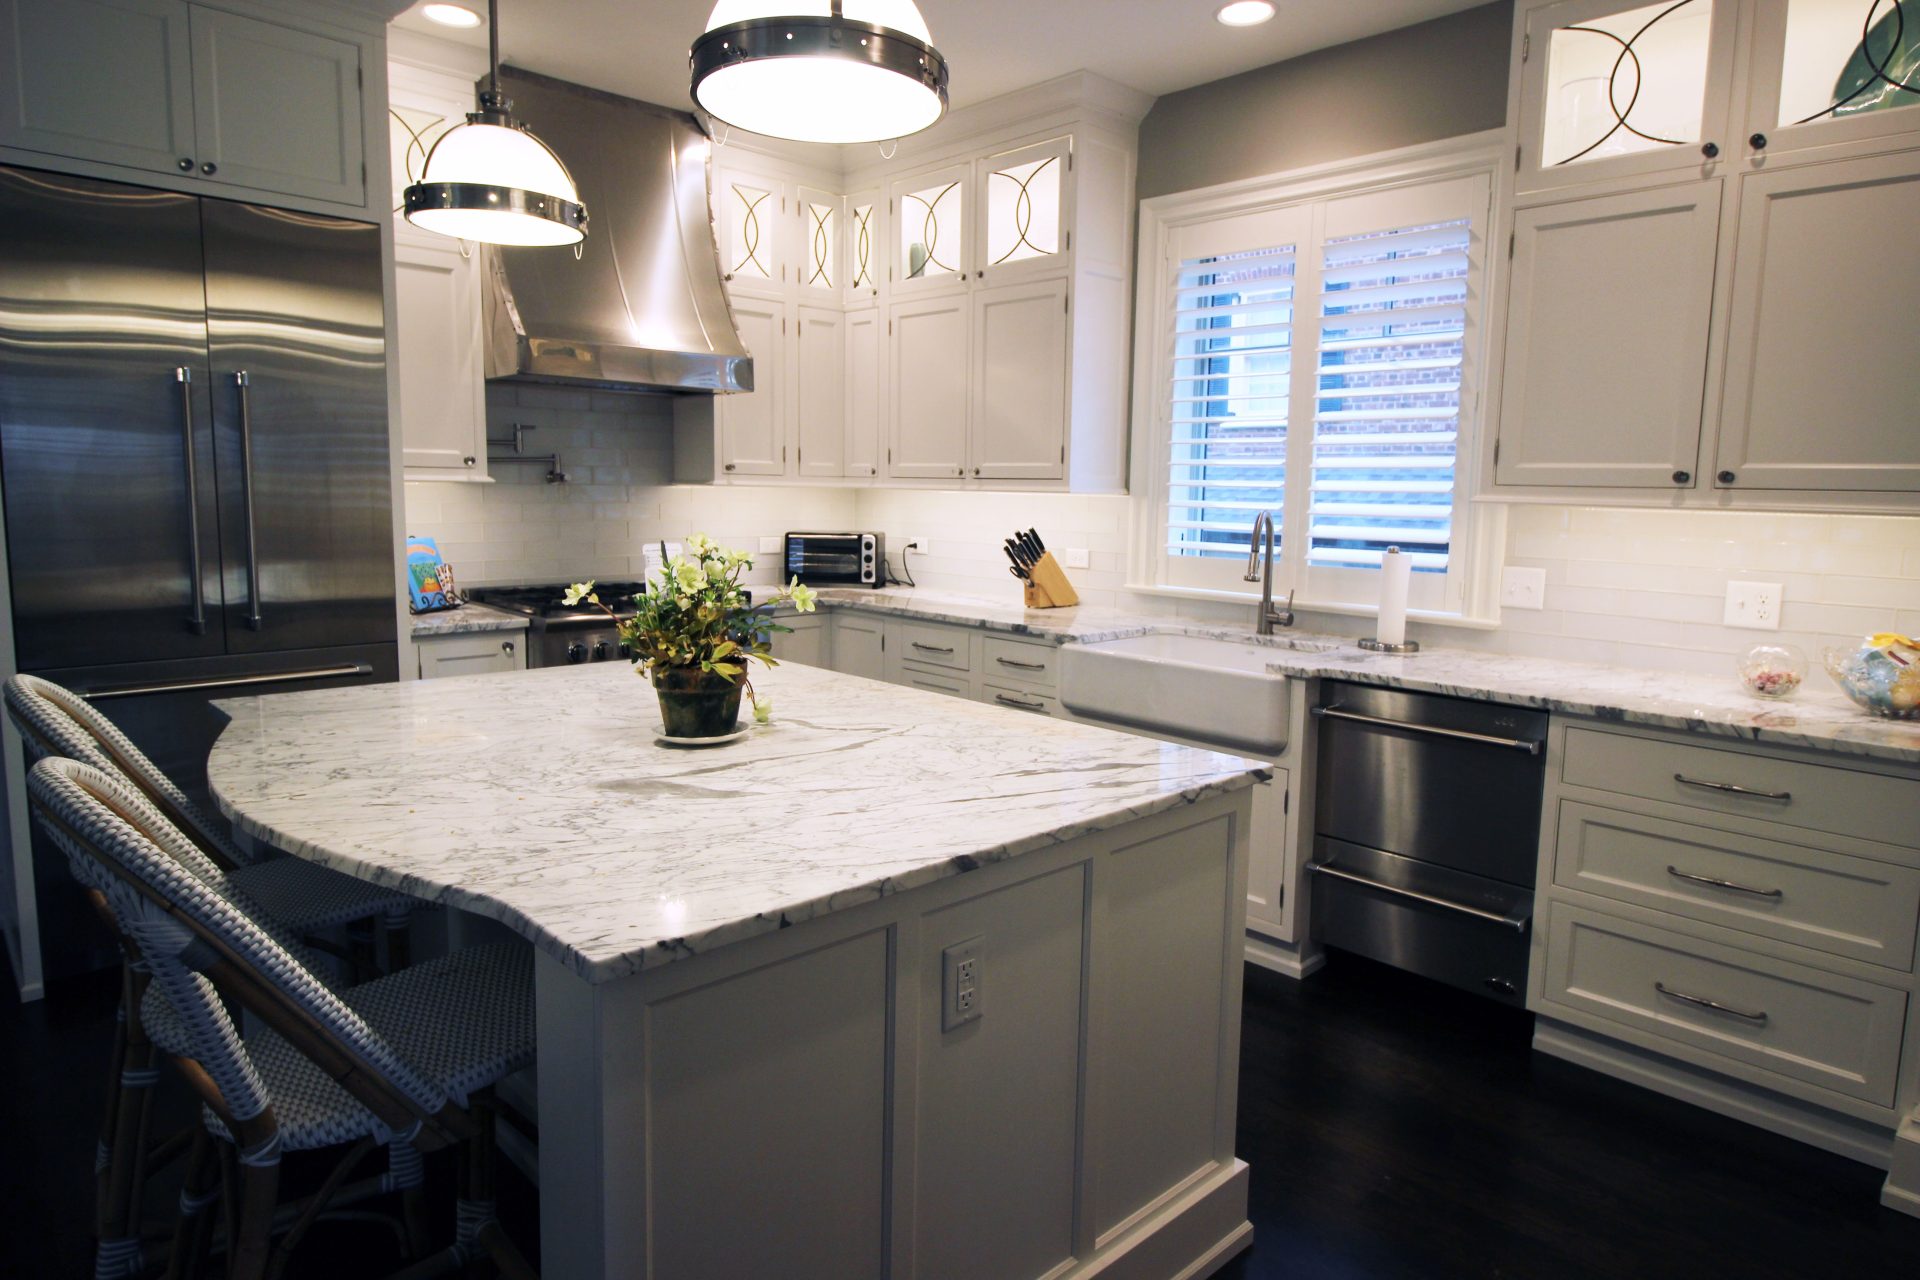 Renovated kitchen with marble countertops